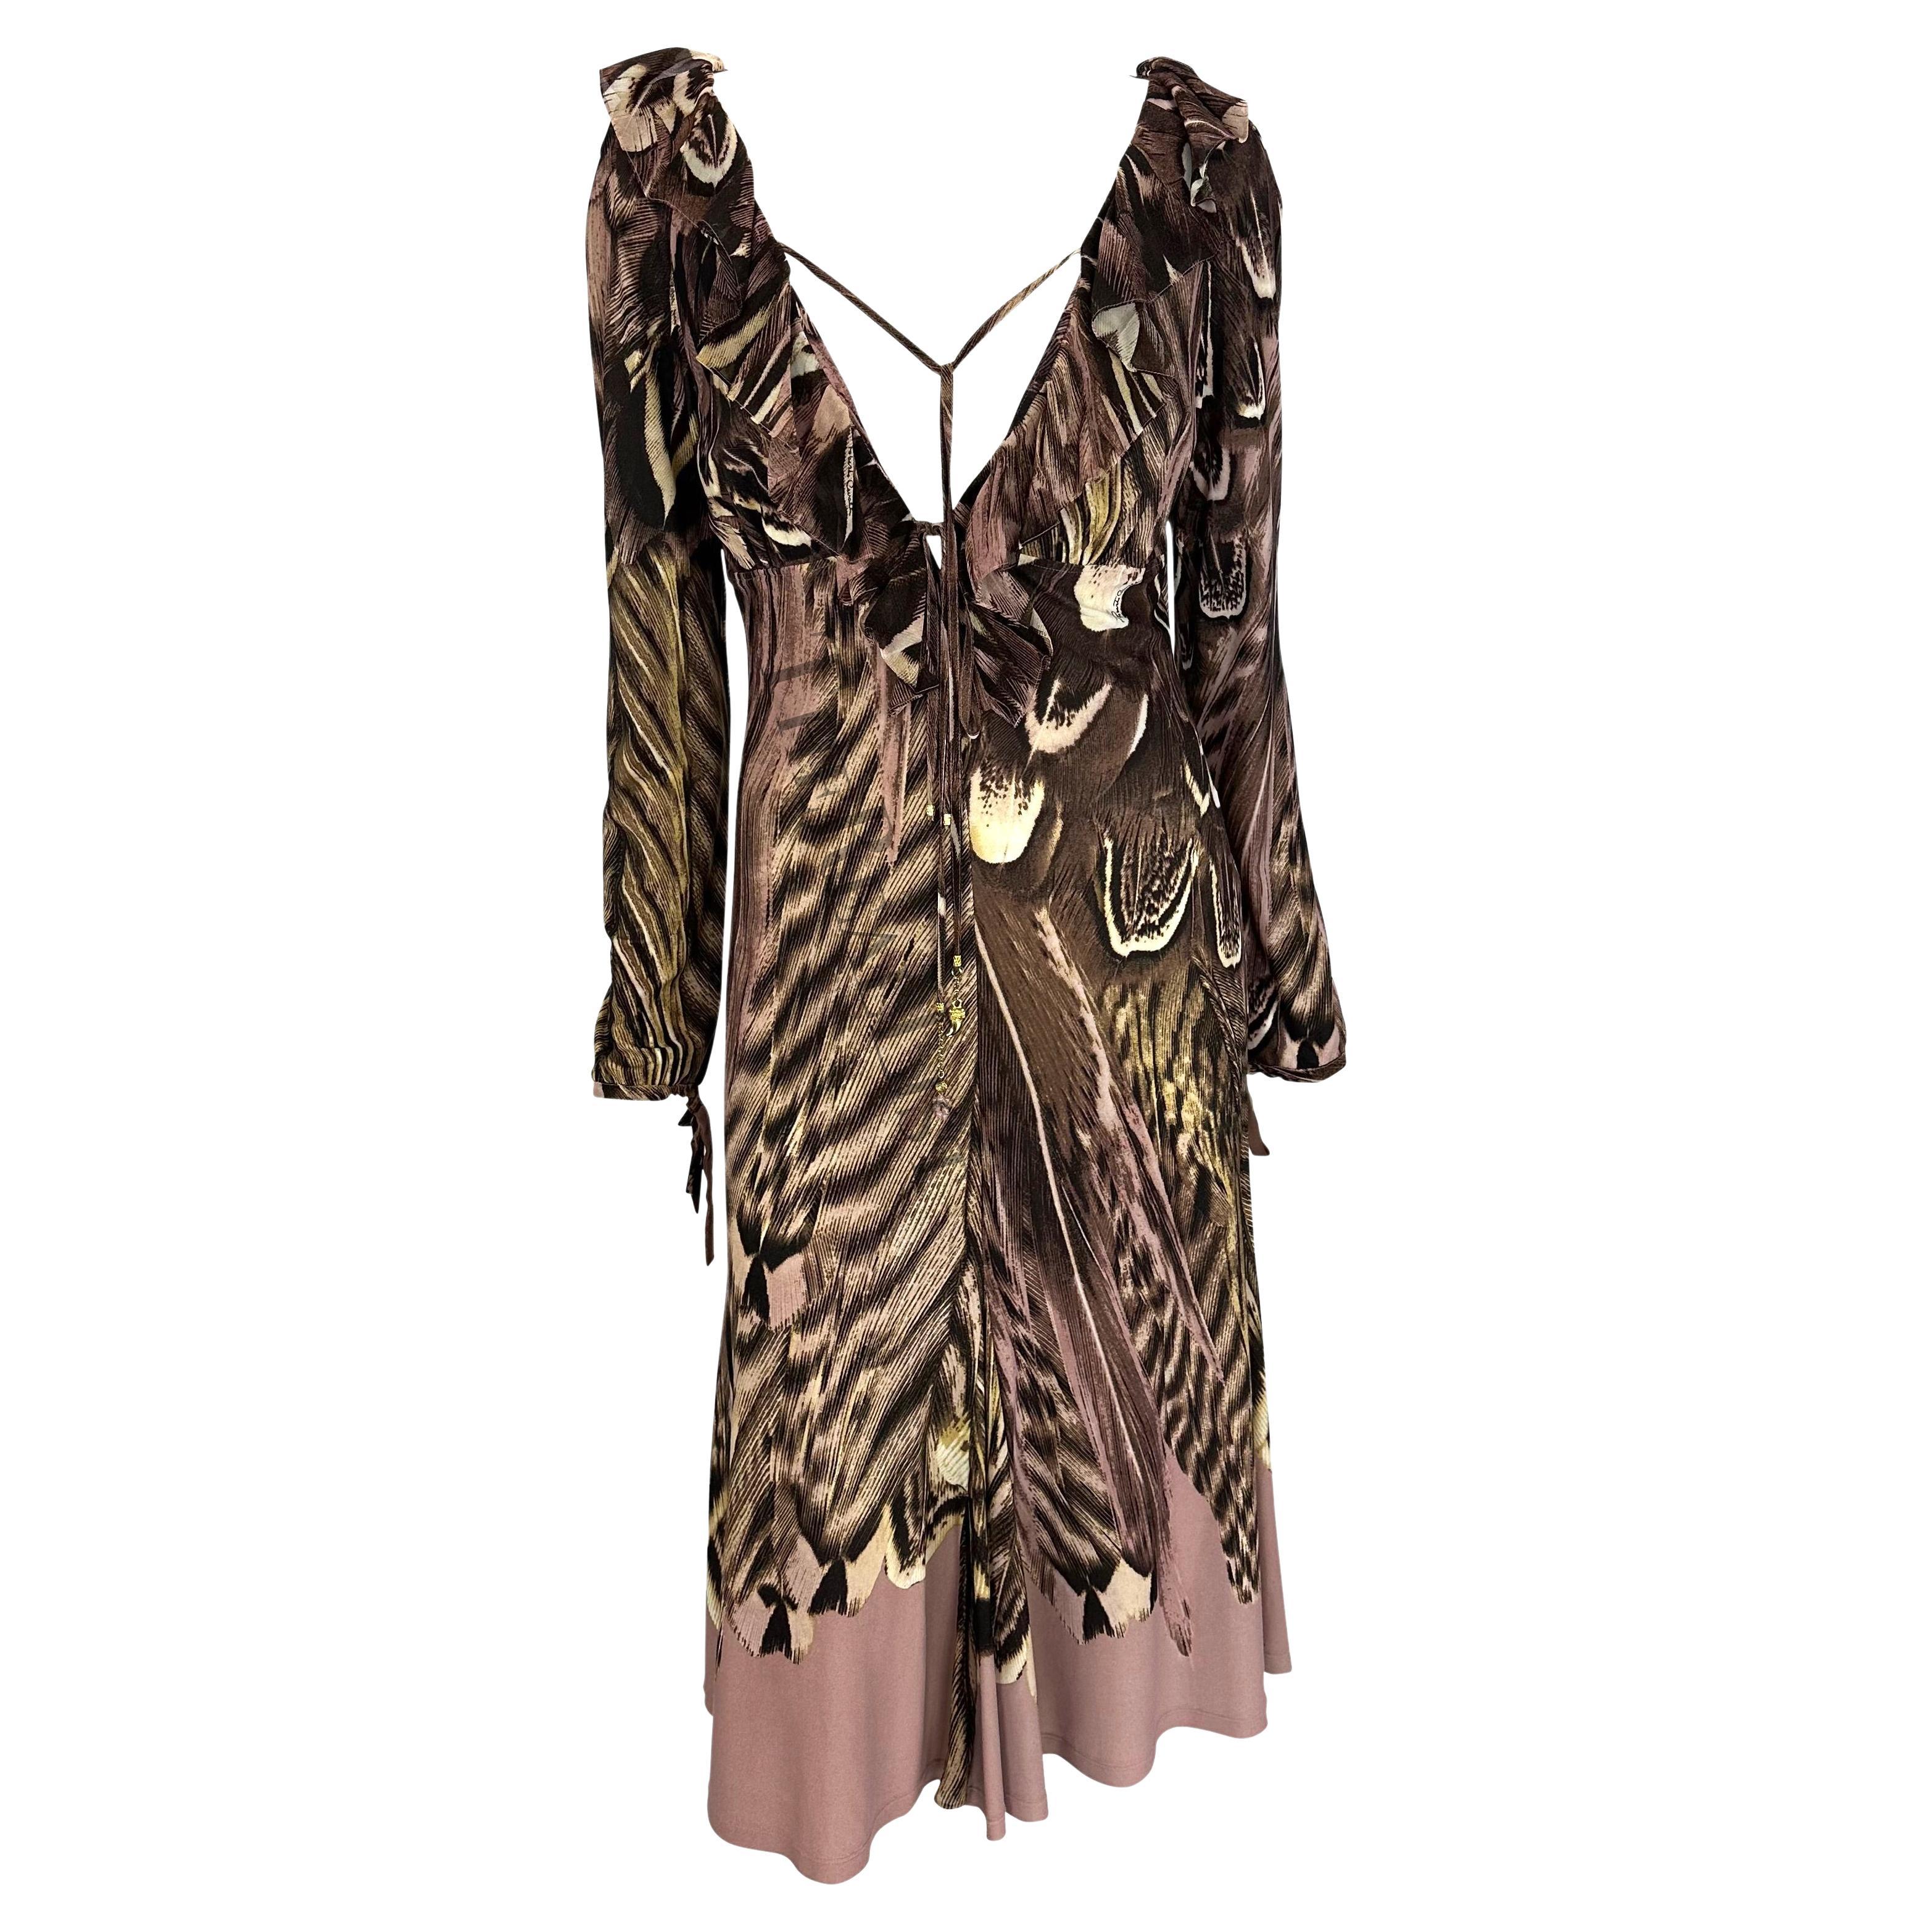 S/S 2005 Roberto Cavalli Pink Feather Print Long Sleeve Charm Dress For Sale